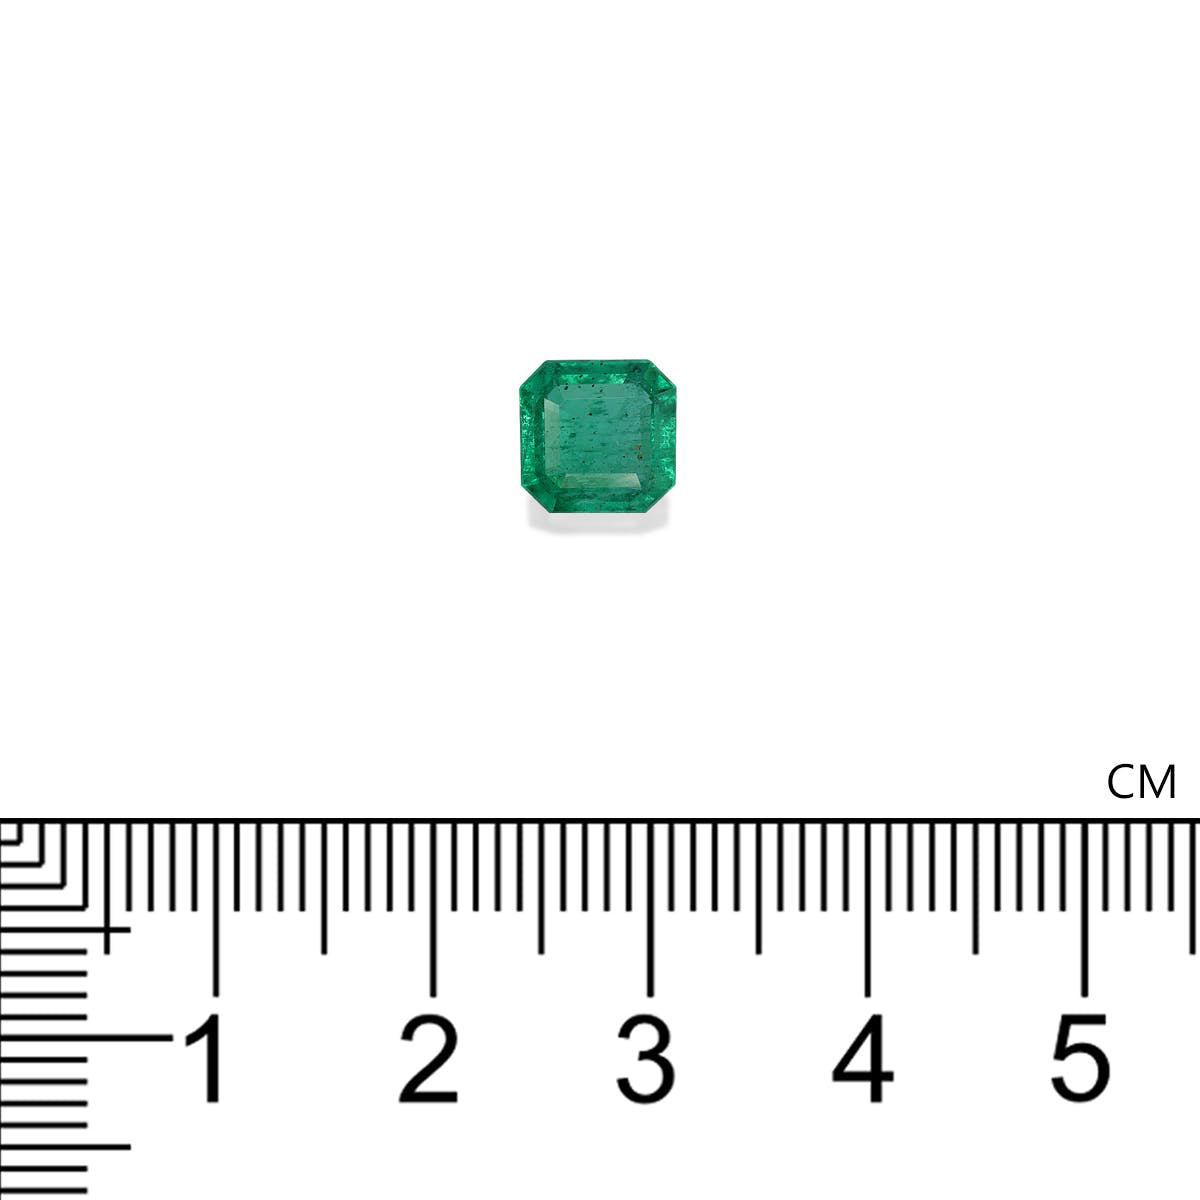 Picture of Green Zambian Emerald 1.61ct - 7mm (PG0343)